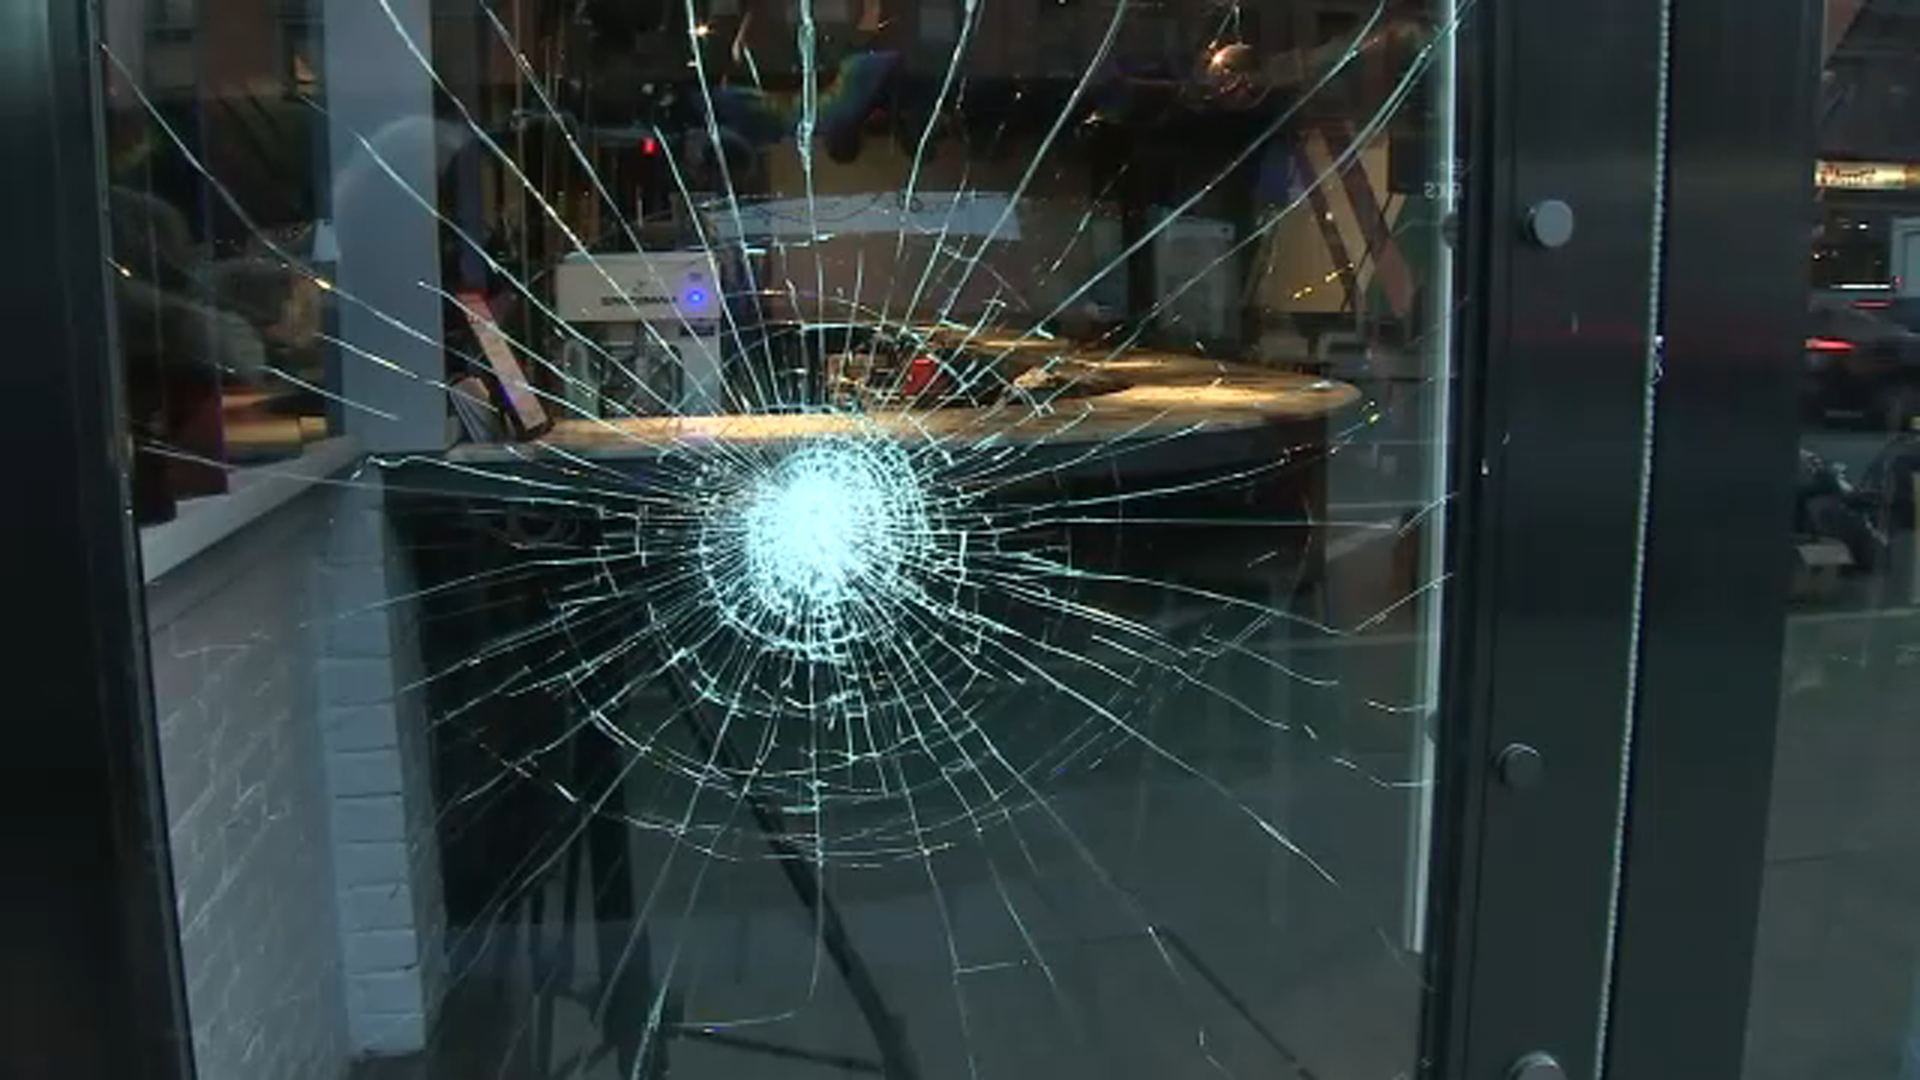 Window of gay bar in Hell’s Kitchen smashed by rock